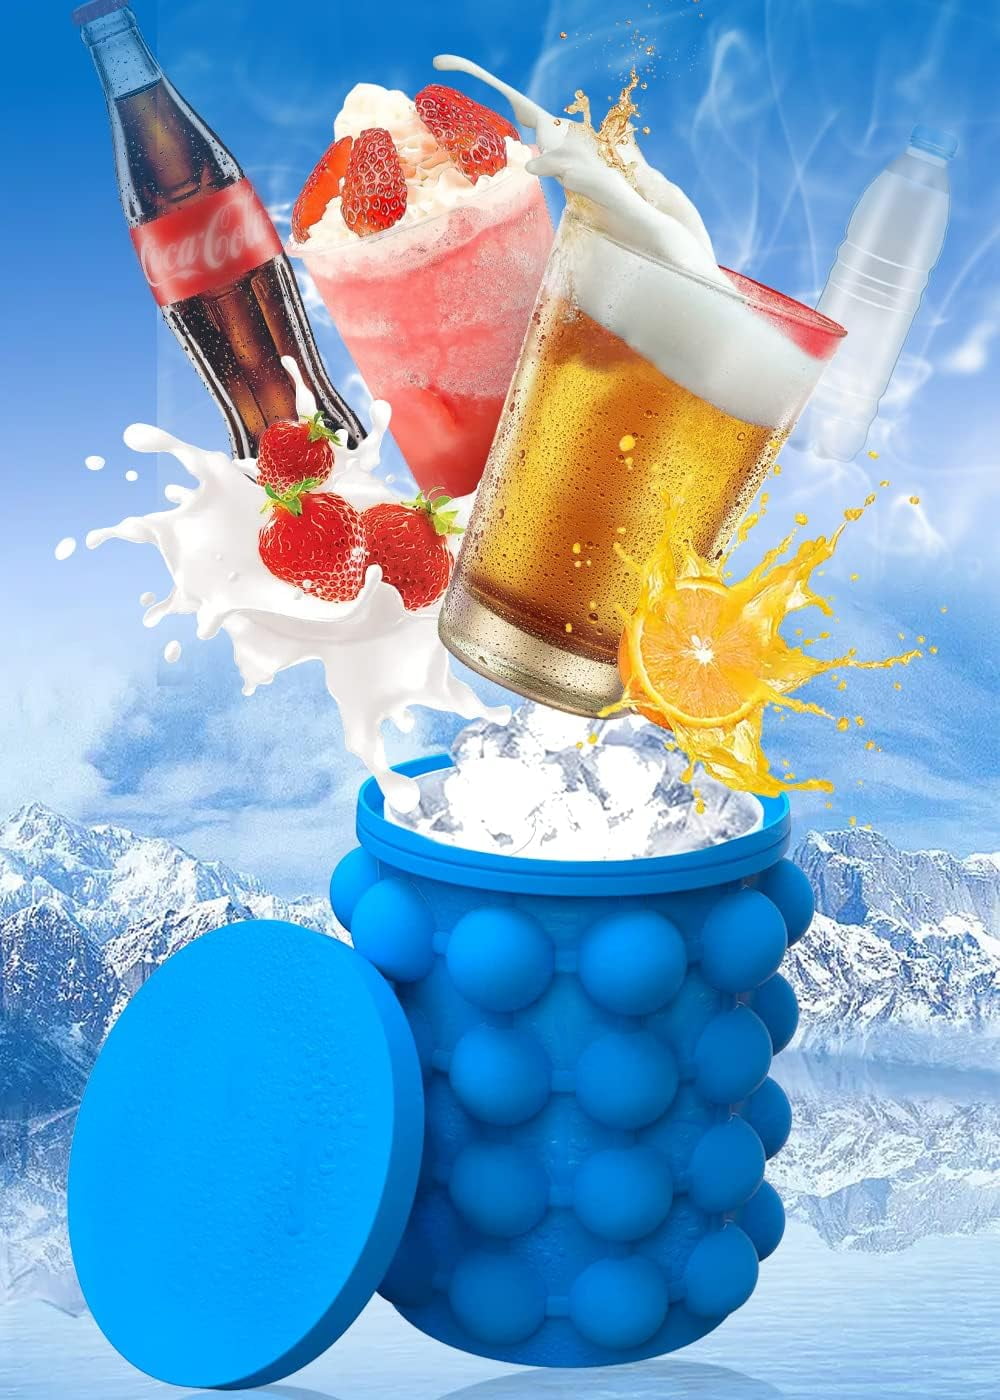 Blue Ice Bucket, Large Silicone Ice Bucket & Ice Mold with lid, (2 in 1)  Space Saving Ice Cube Maker, Portable Silicon Ice Cube Maker for Football